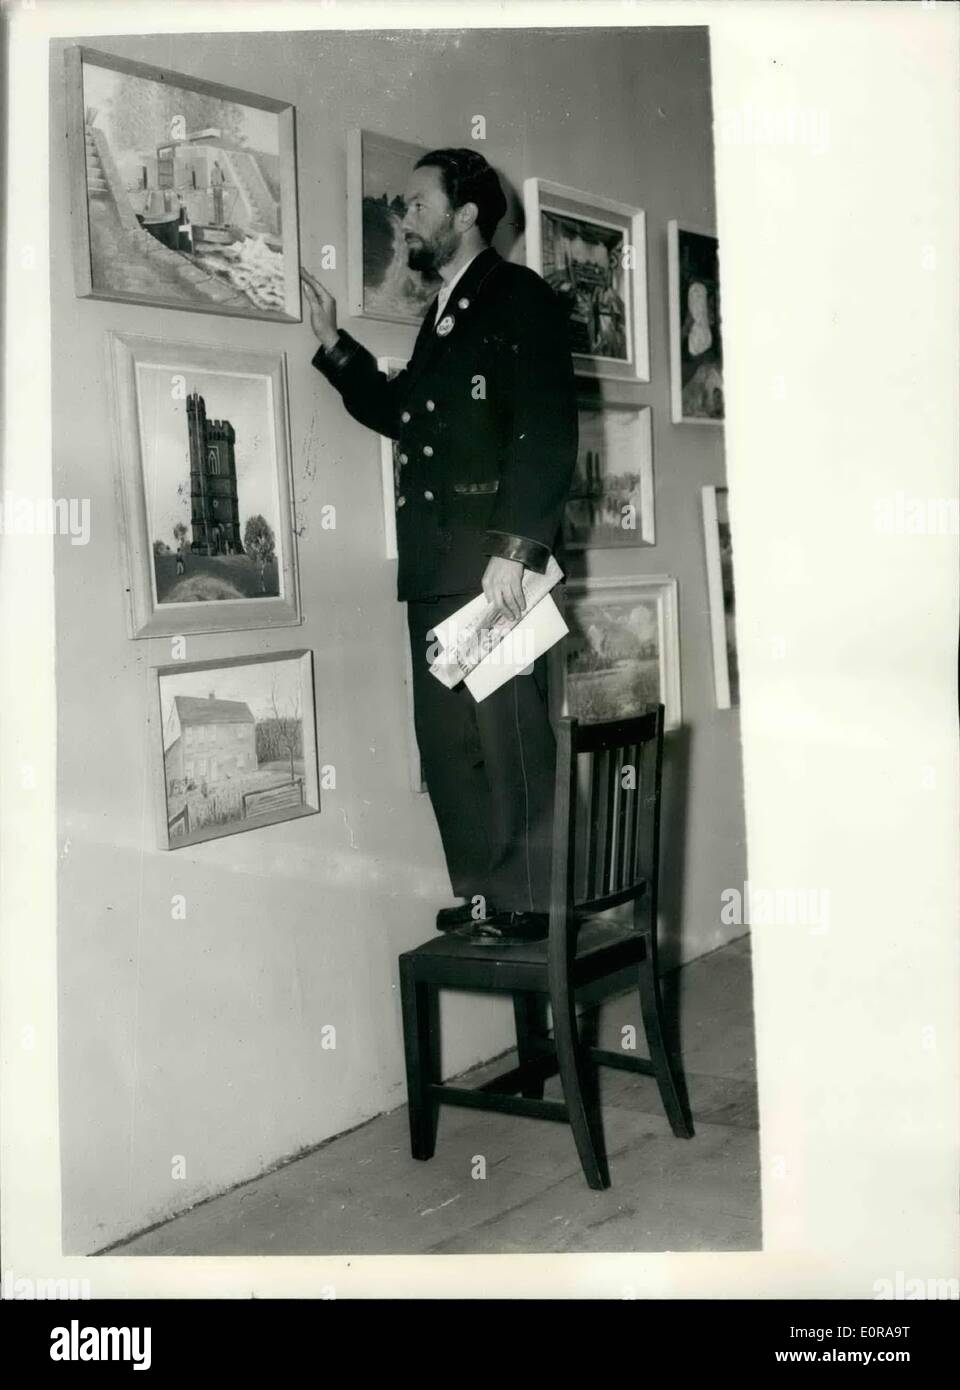 Nov. 11, 1958 - Annual Exhibition of London transport art group. ''standing embargo'' here... Photo shows:  Mr. L. J. Hind a bus driver from West Drayton - stands on a chair to view his painting ''into the locks'' - at the annual exhibition at the London transport art group - at Charing Cross underground station this morning. Stock Photo